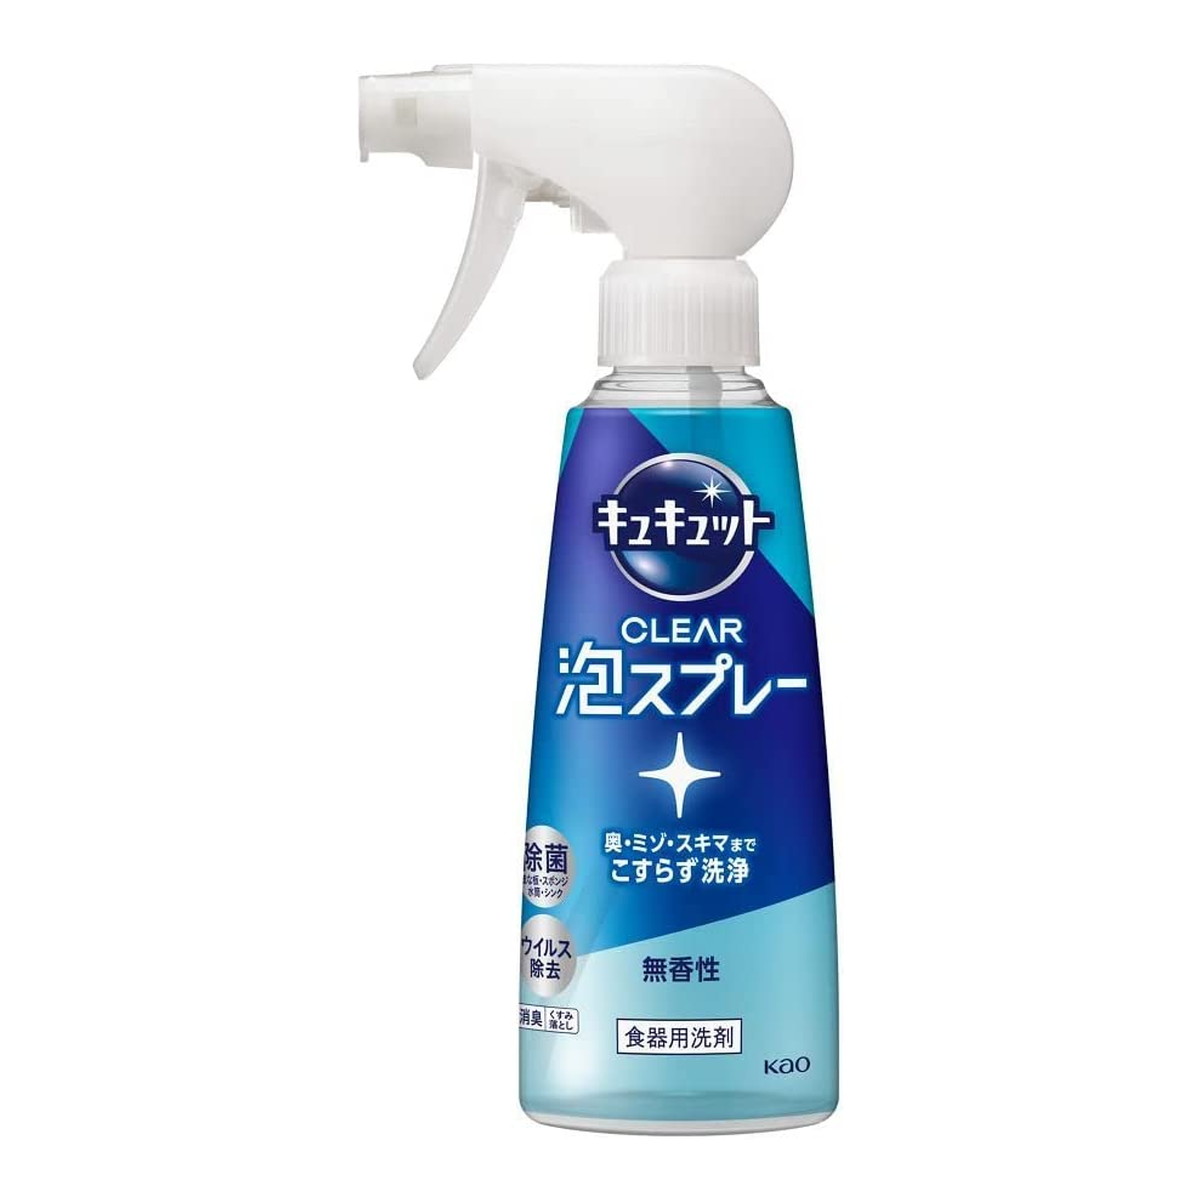 Kao キュキュット CLEAR 泡スプレー 無香性 本体 280ml ×10 キュキュット 台所用洗剤の商品画像